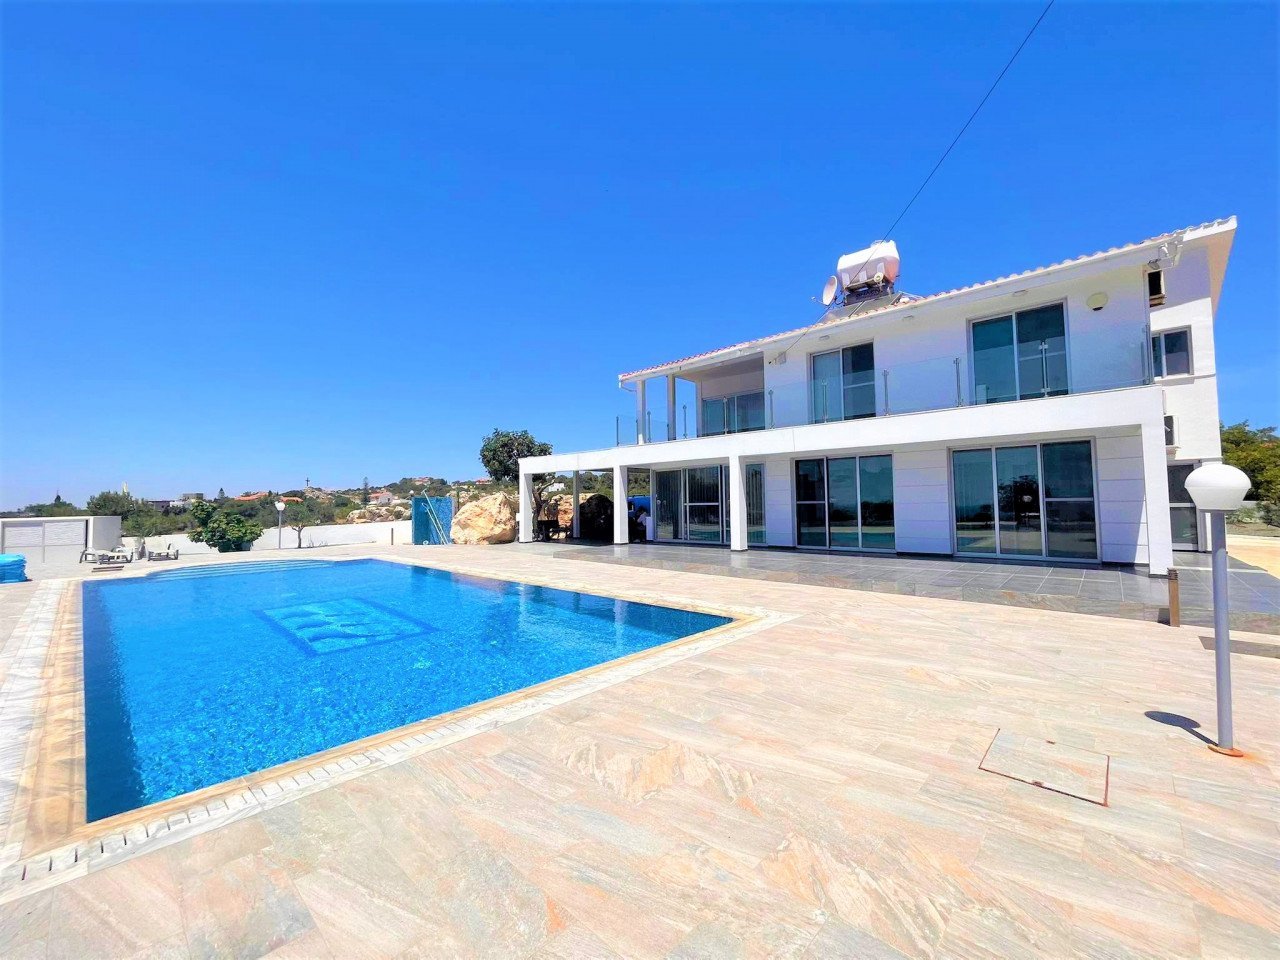 Property for Sale: House (Detached) in Agia Napa, Famagusta  | Key Realtor Cyprus